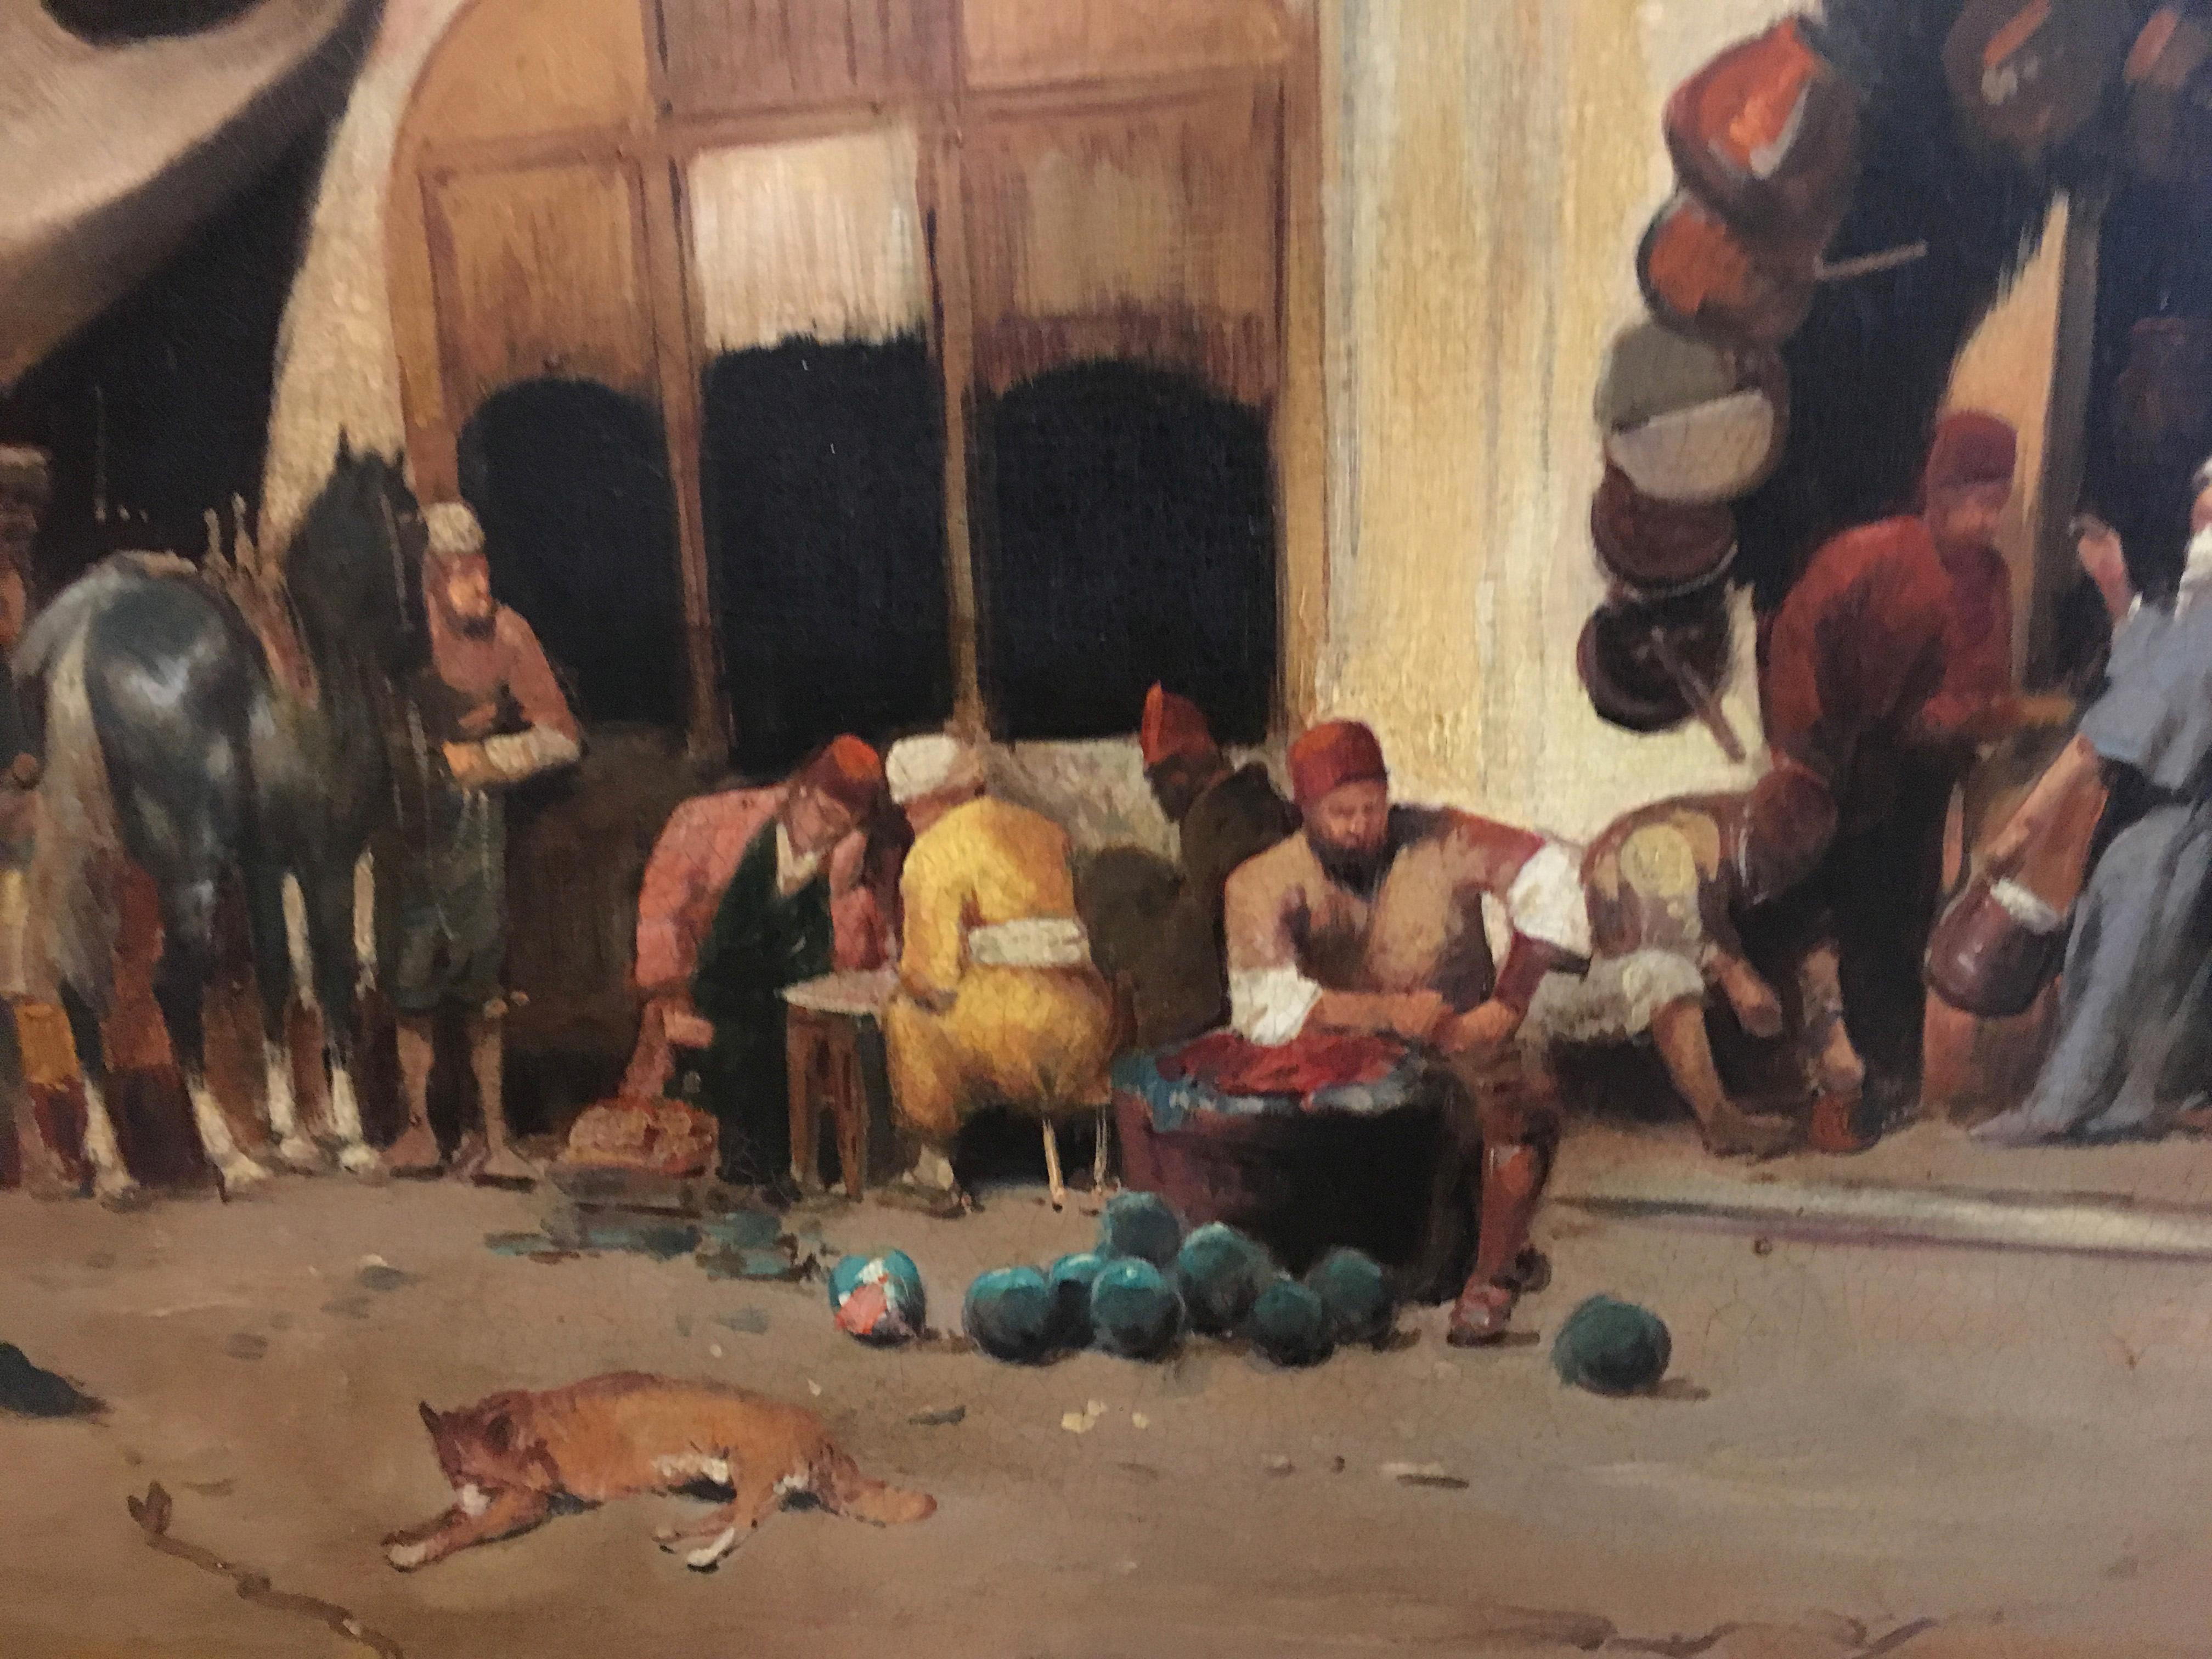 ARABIAN SCENE - Oil on canvas cm. 60x90 by Francoise Vigneron, Italy 2004.
In this beautiful oil on canvas Francoise Vigneron was inspired by the oriental and Arab landscapes of the French painter Charles-Théodore Frère, who after his travels in the